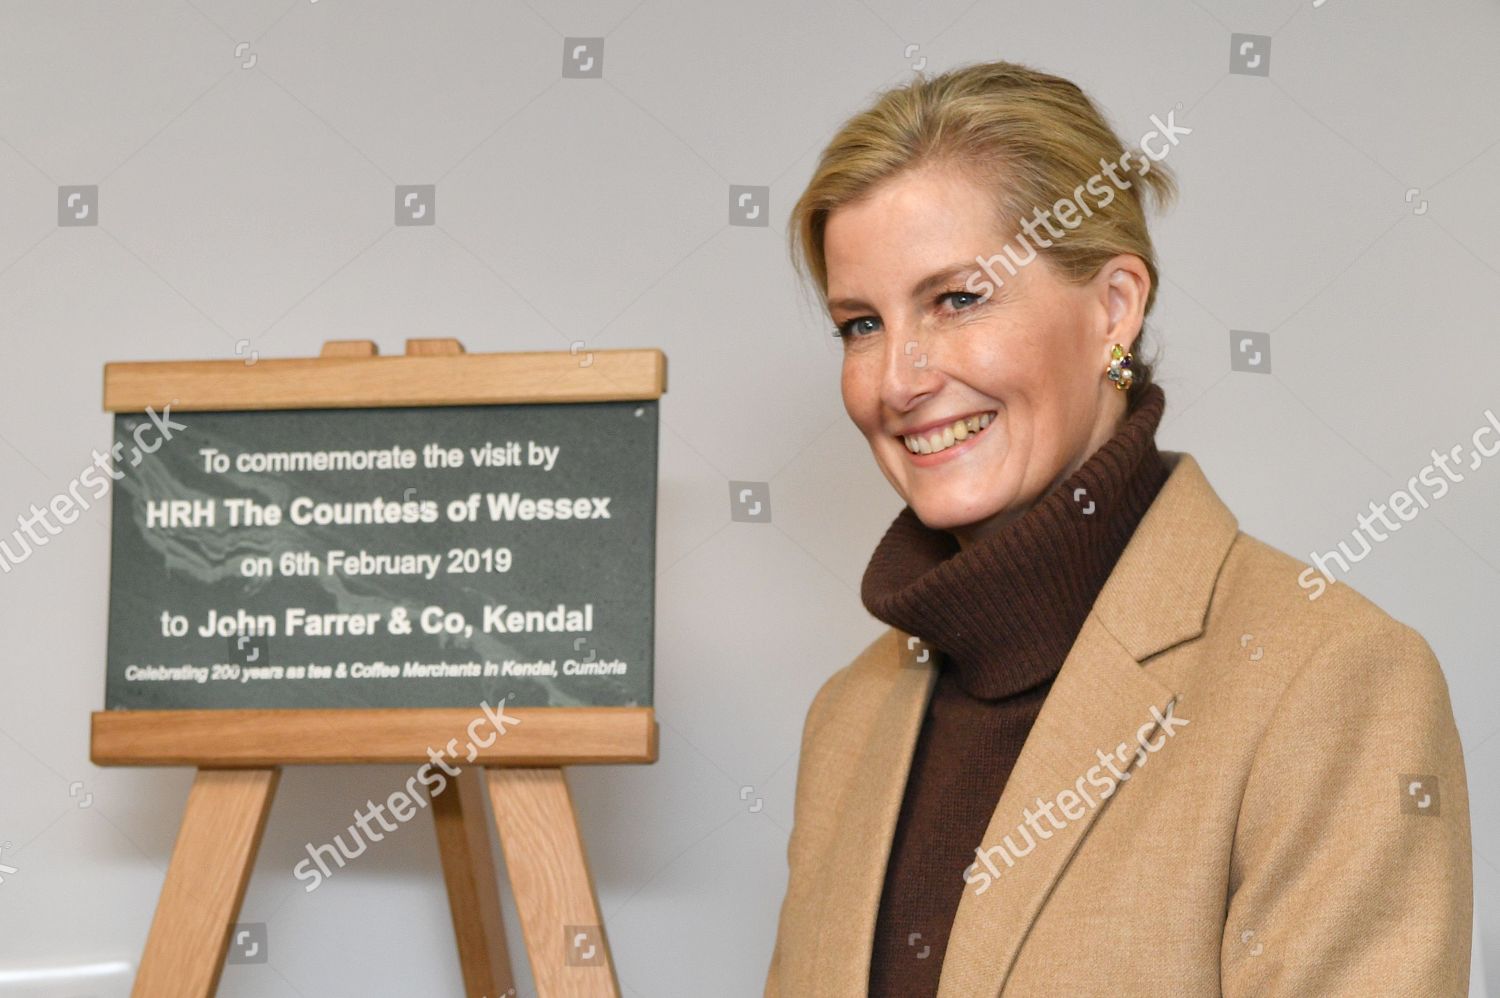 sophie-countess-of-wessex-visit-to-cumbria-shutterstock-editorial-10095439ar.jpg